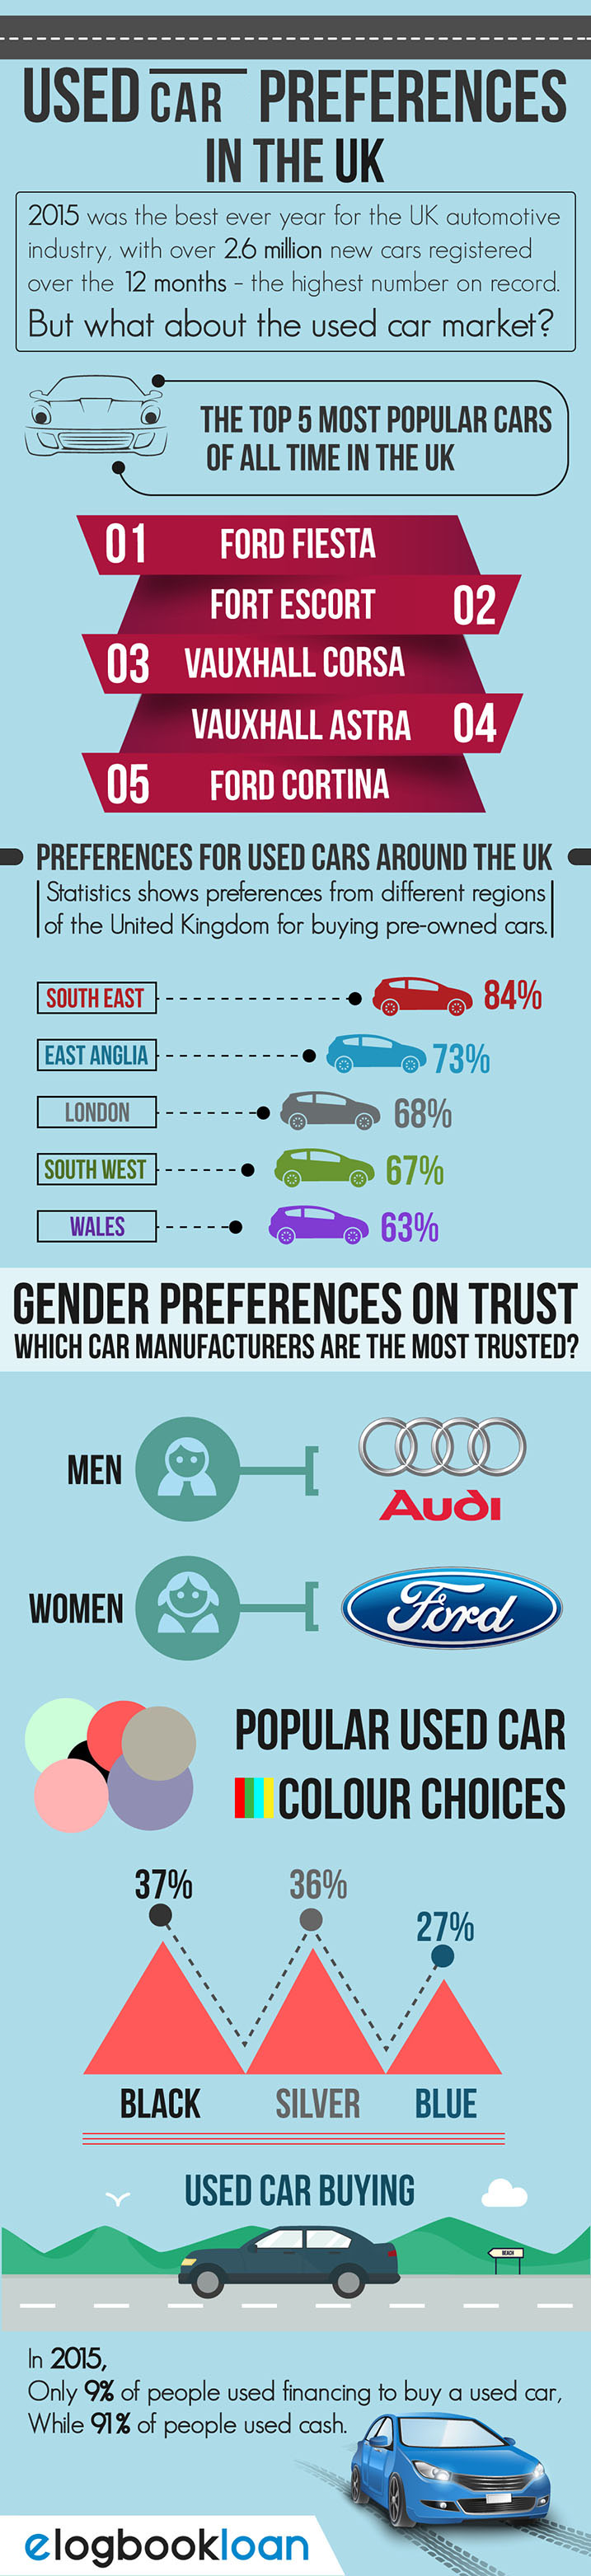 Used Car Preferences in the UK